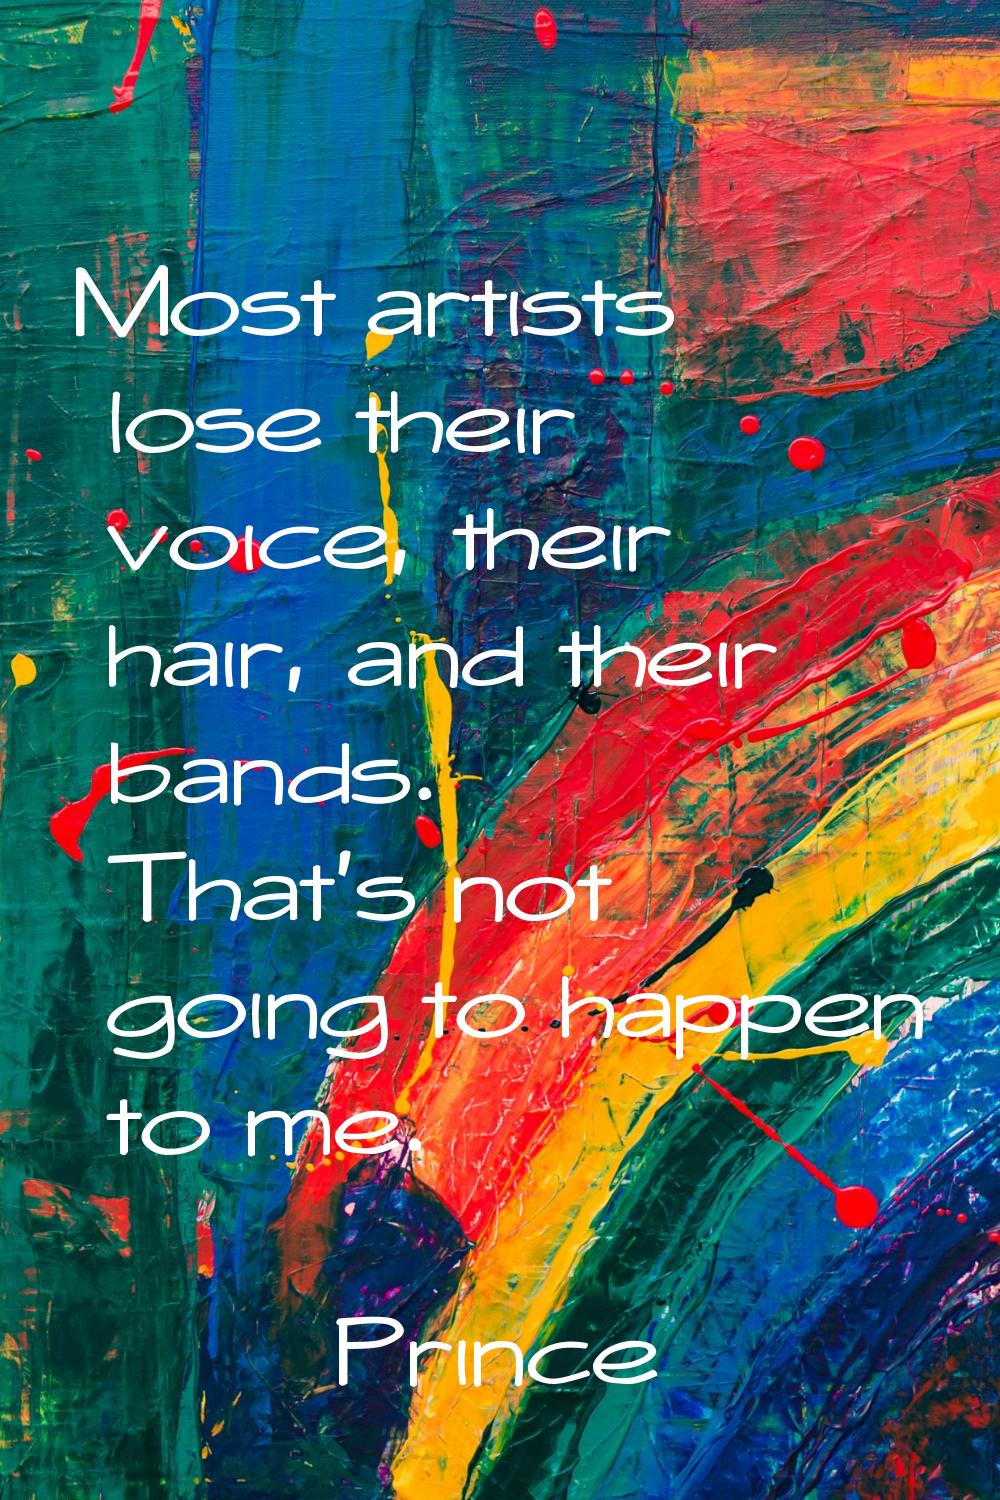 Most artists lose their voice, their hair, and their bands. That's not going to happen to me.